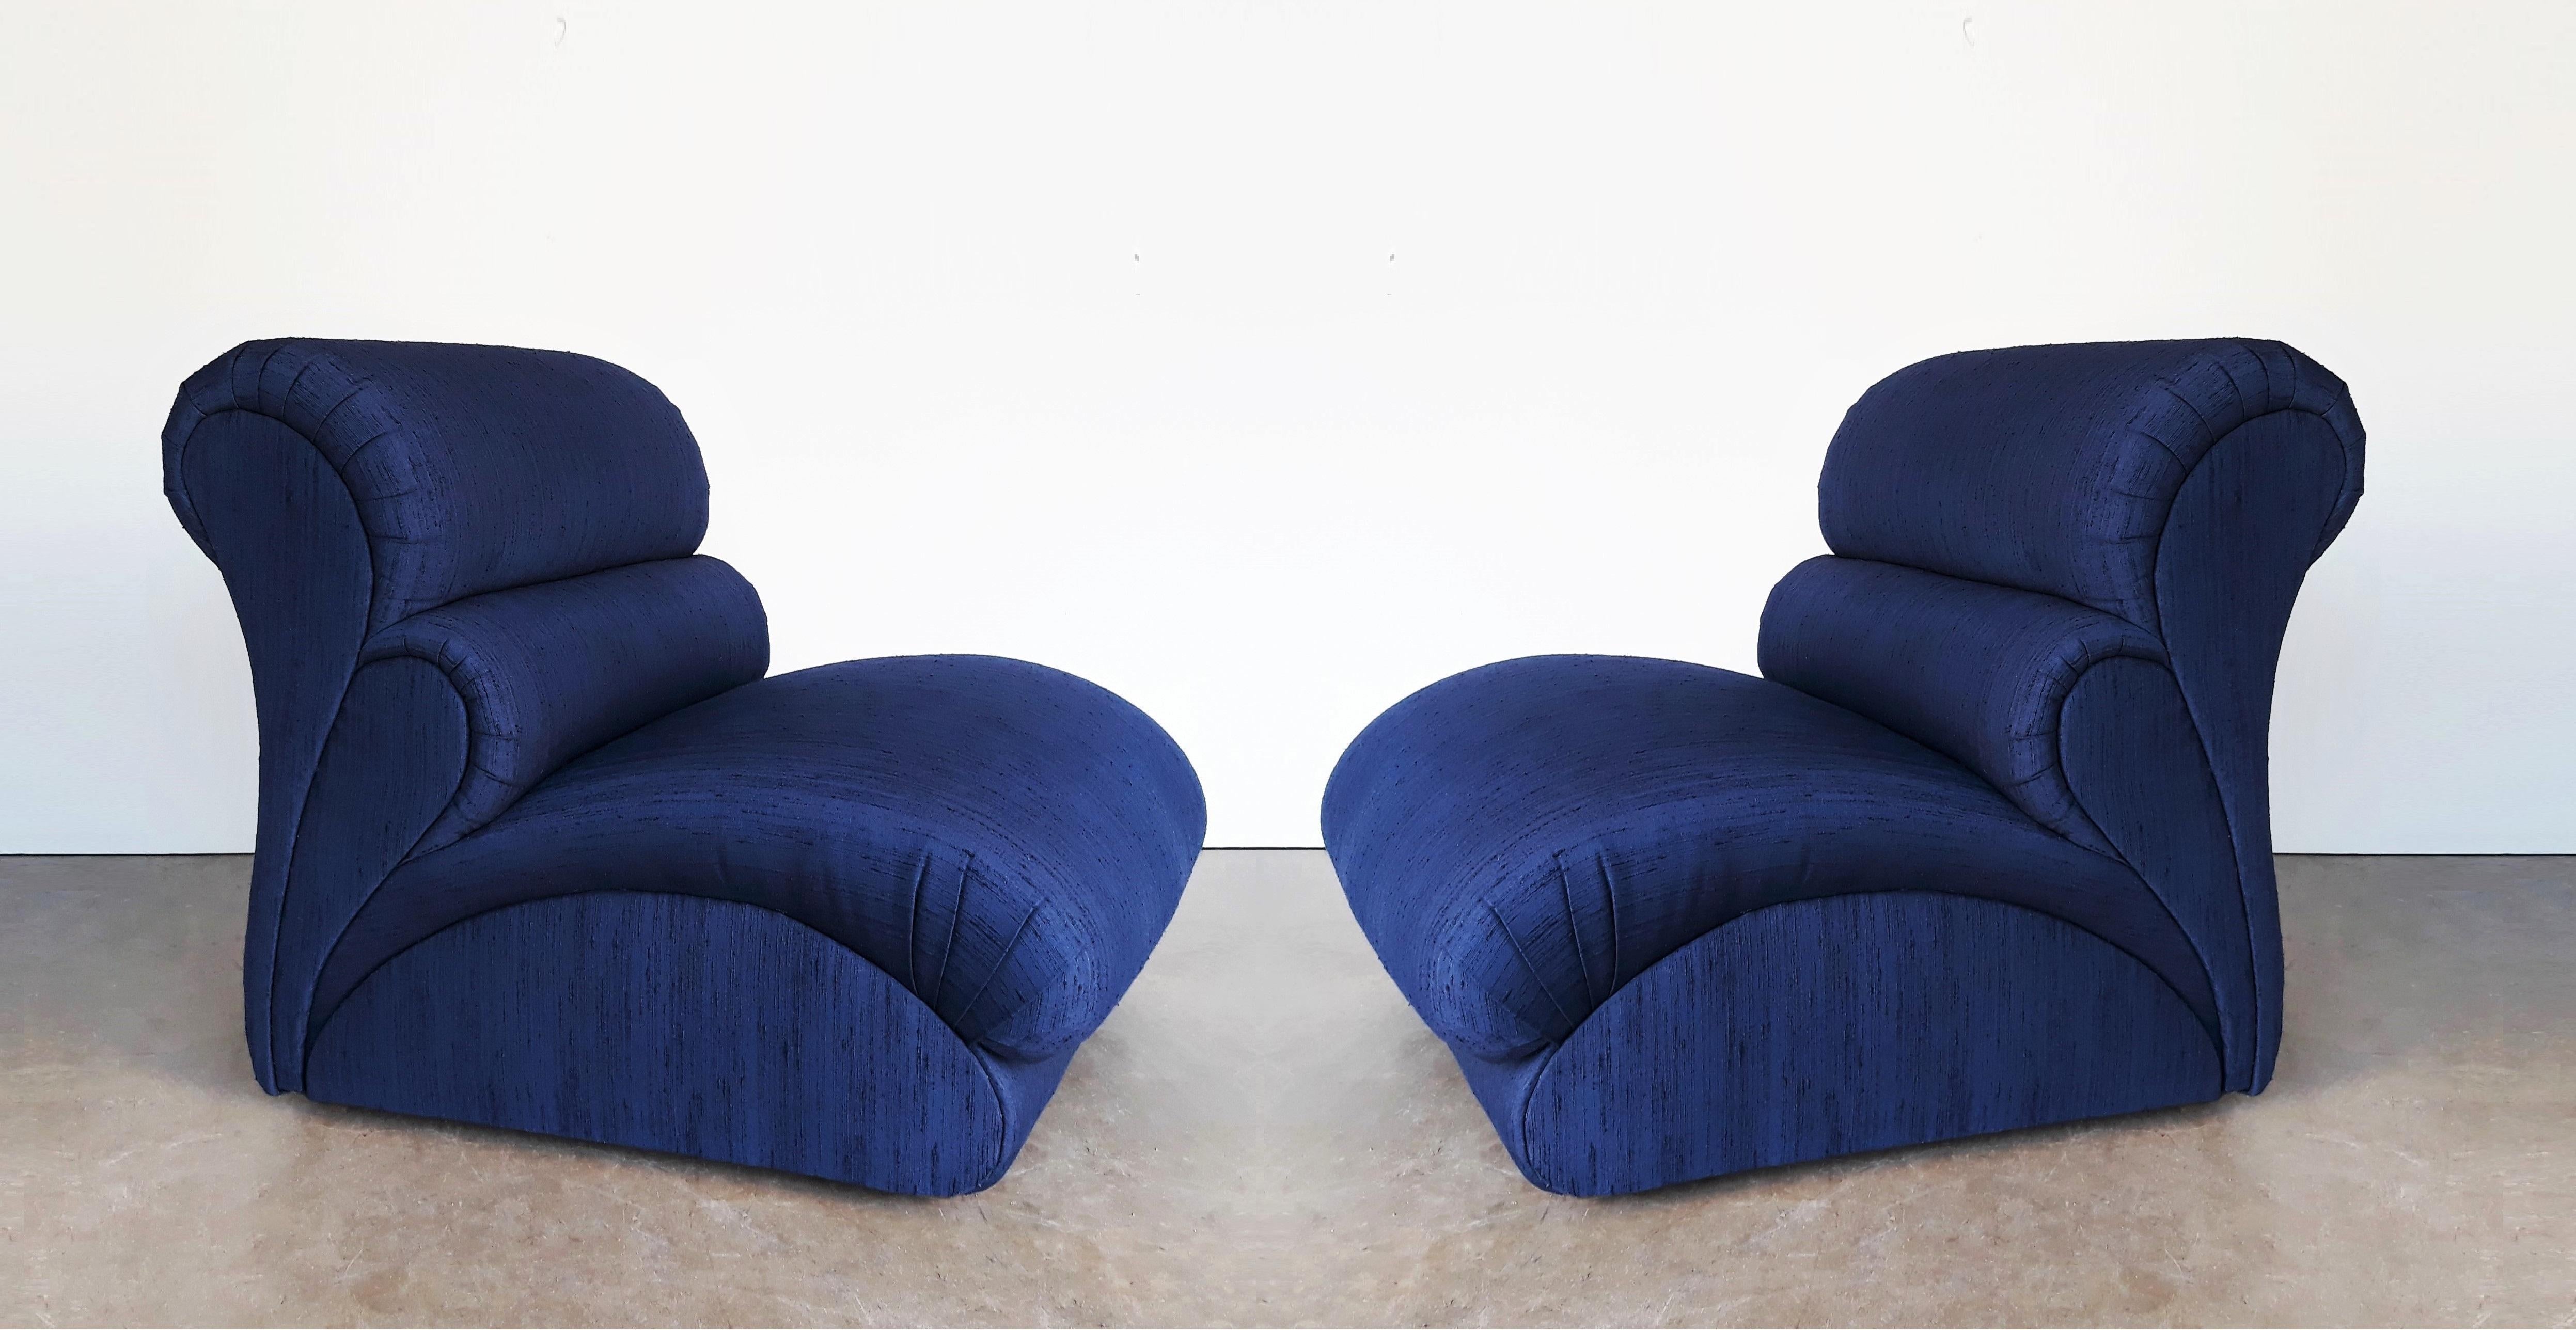 These stunning Avant Garde lounge/slipper chairs by Weiman Furniture are no exception. From their visually striking silhouette to their overstuffed, over-sized frames, stylish comfort is of top priority; they are minimalist. Upholstered in a